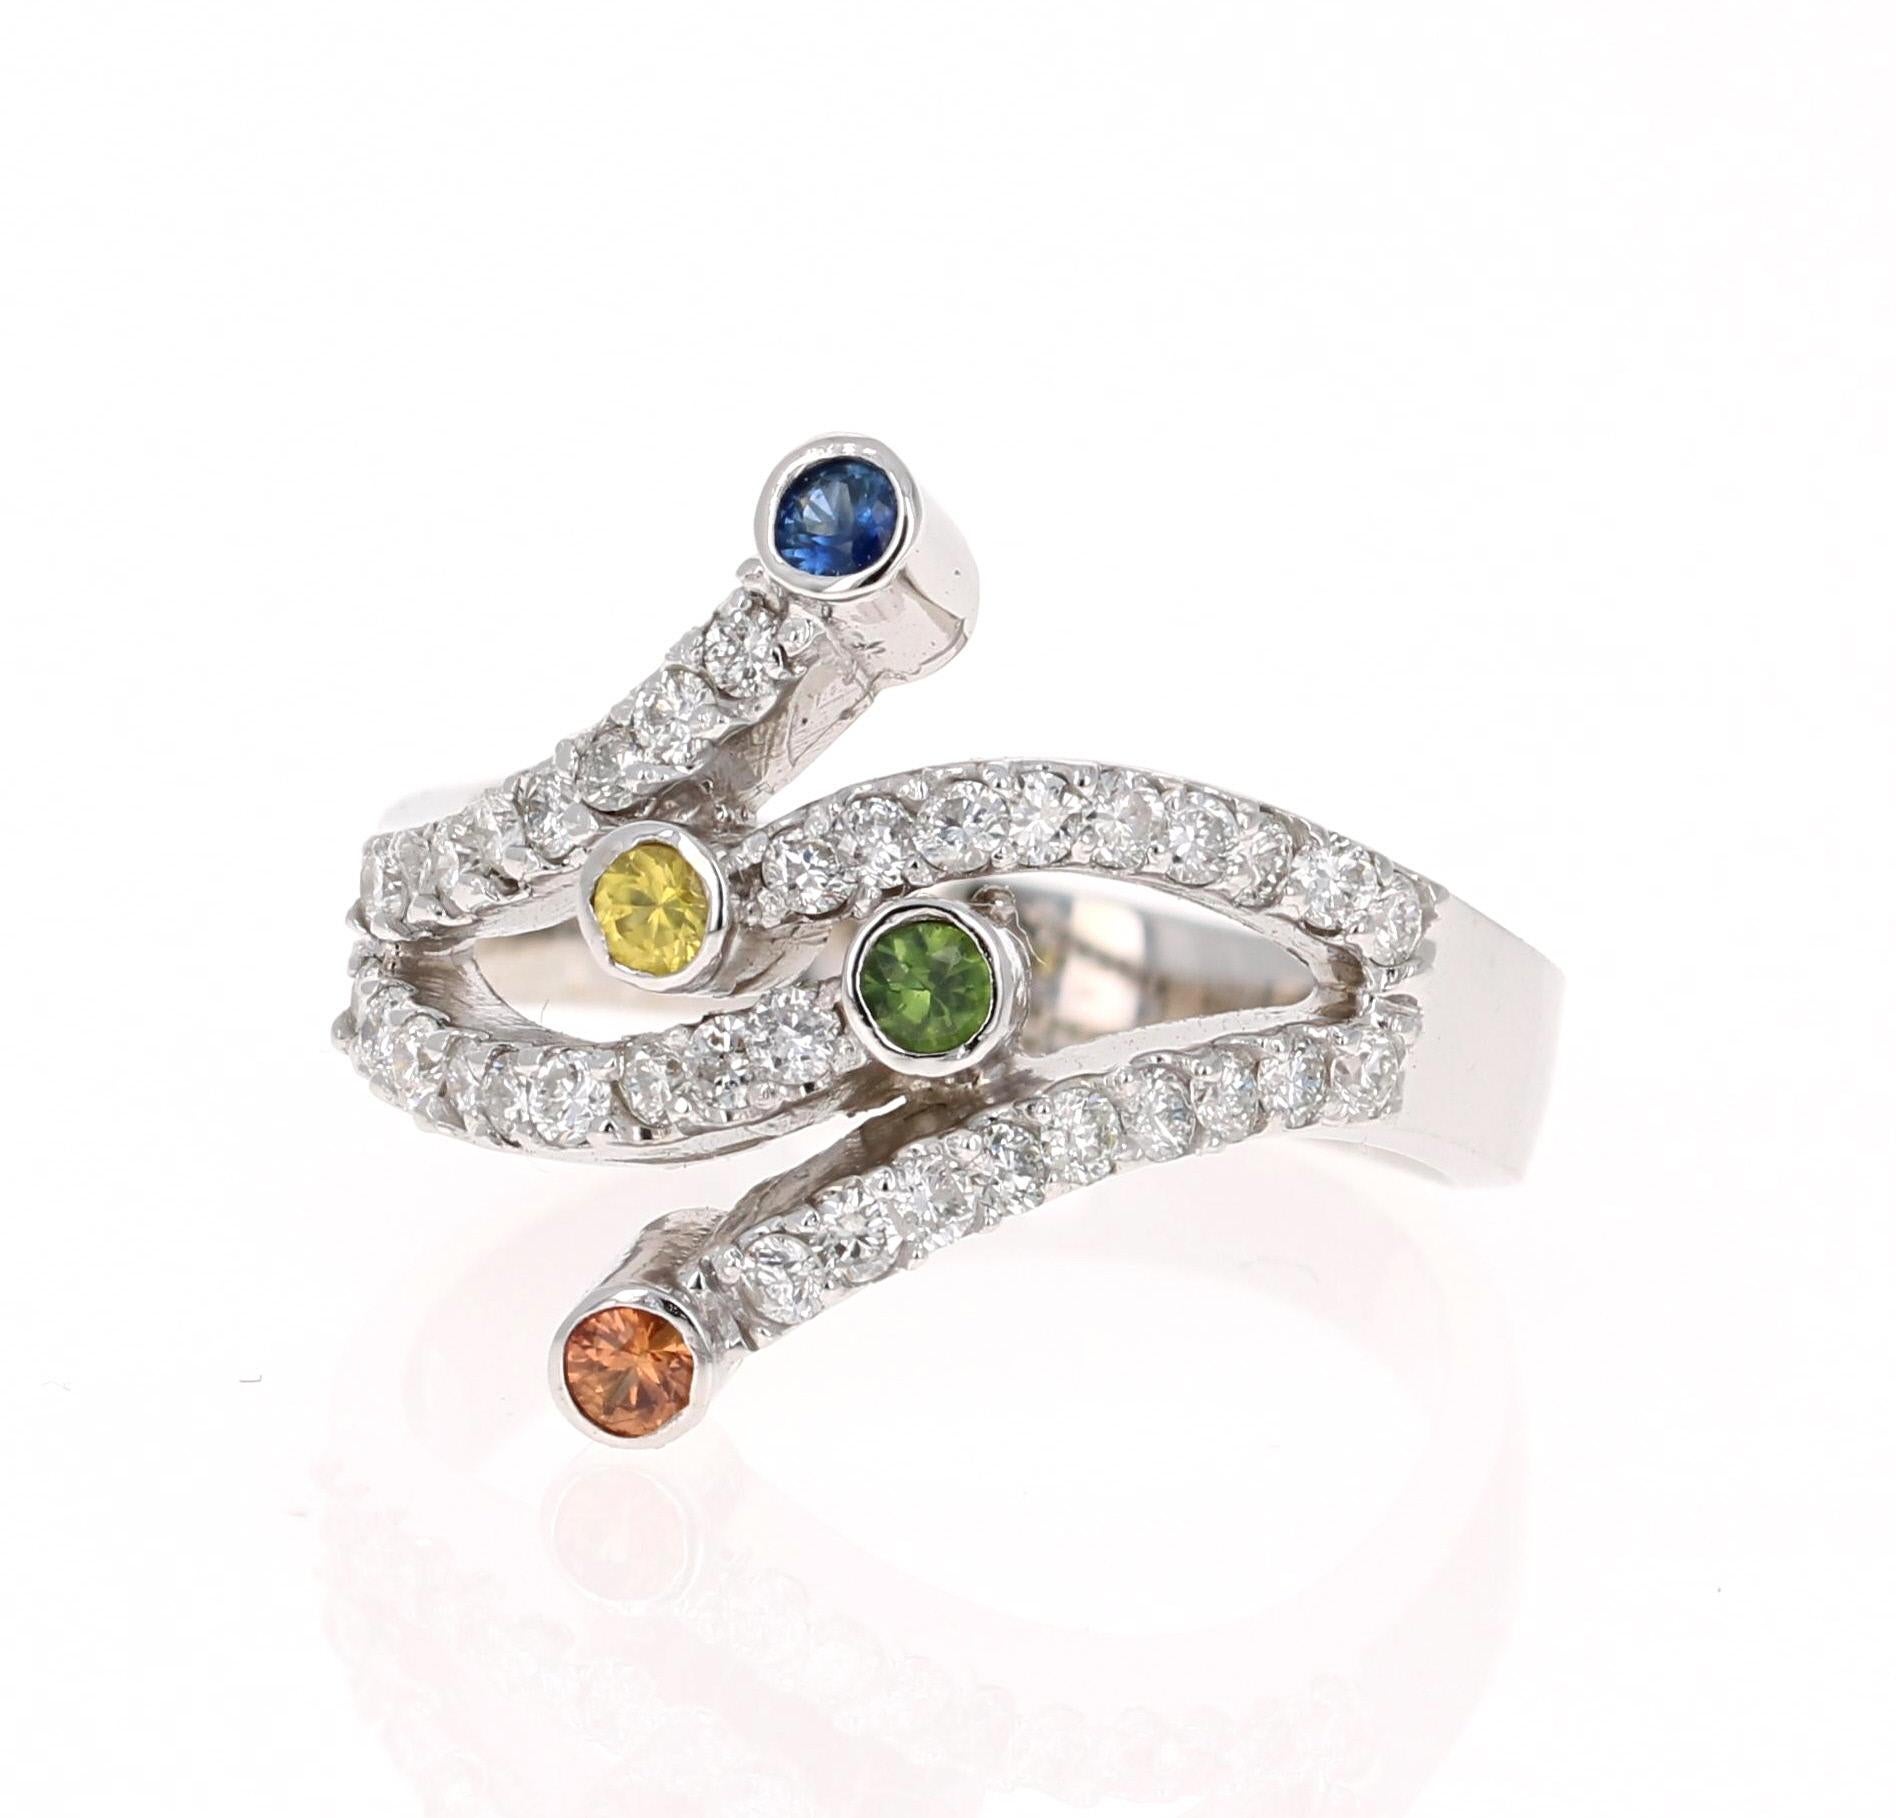 A Uniquely designed Multi-Colored Sapphire and Diamond Ring that is sure to be a great addition to your jewelry collection!  
This ring has 4 Round Cut Multi-Colored Sapphires that weigh 0.20 carats which are surrounded by 36 Round cut Diamonds that